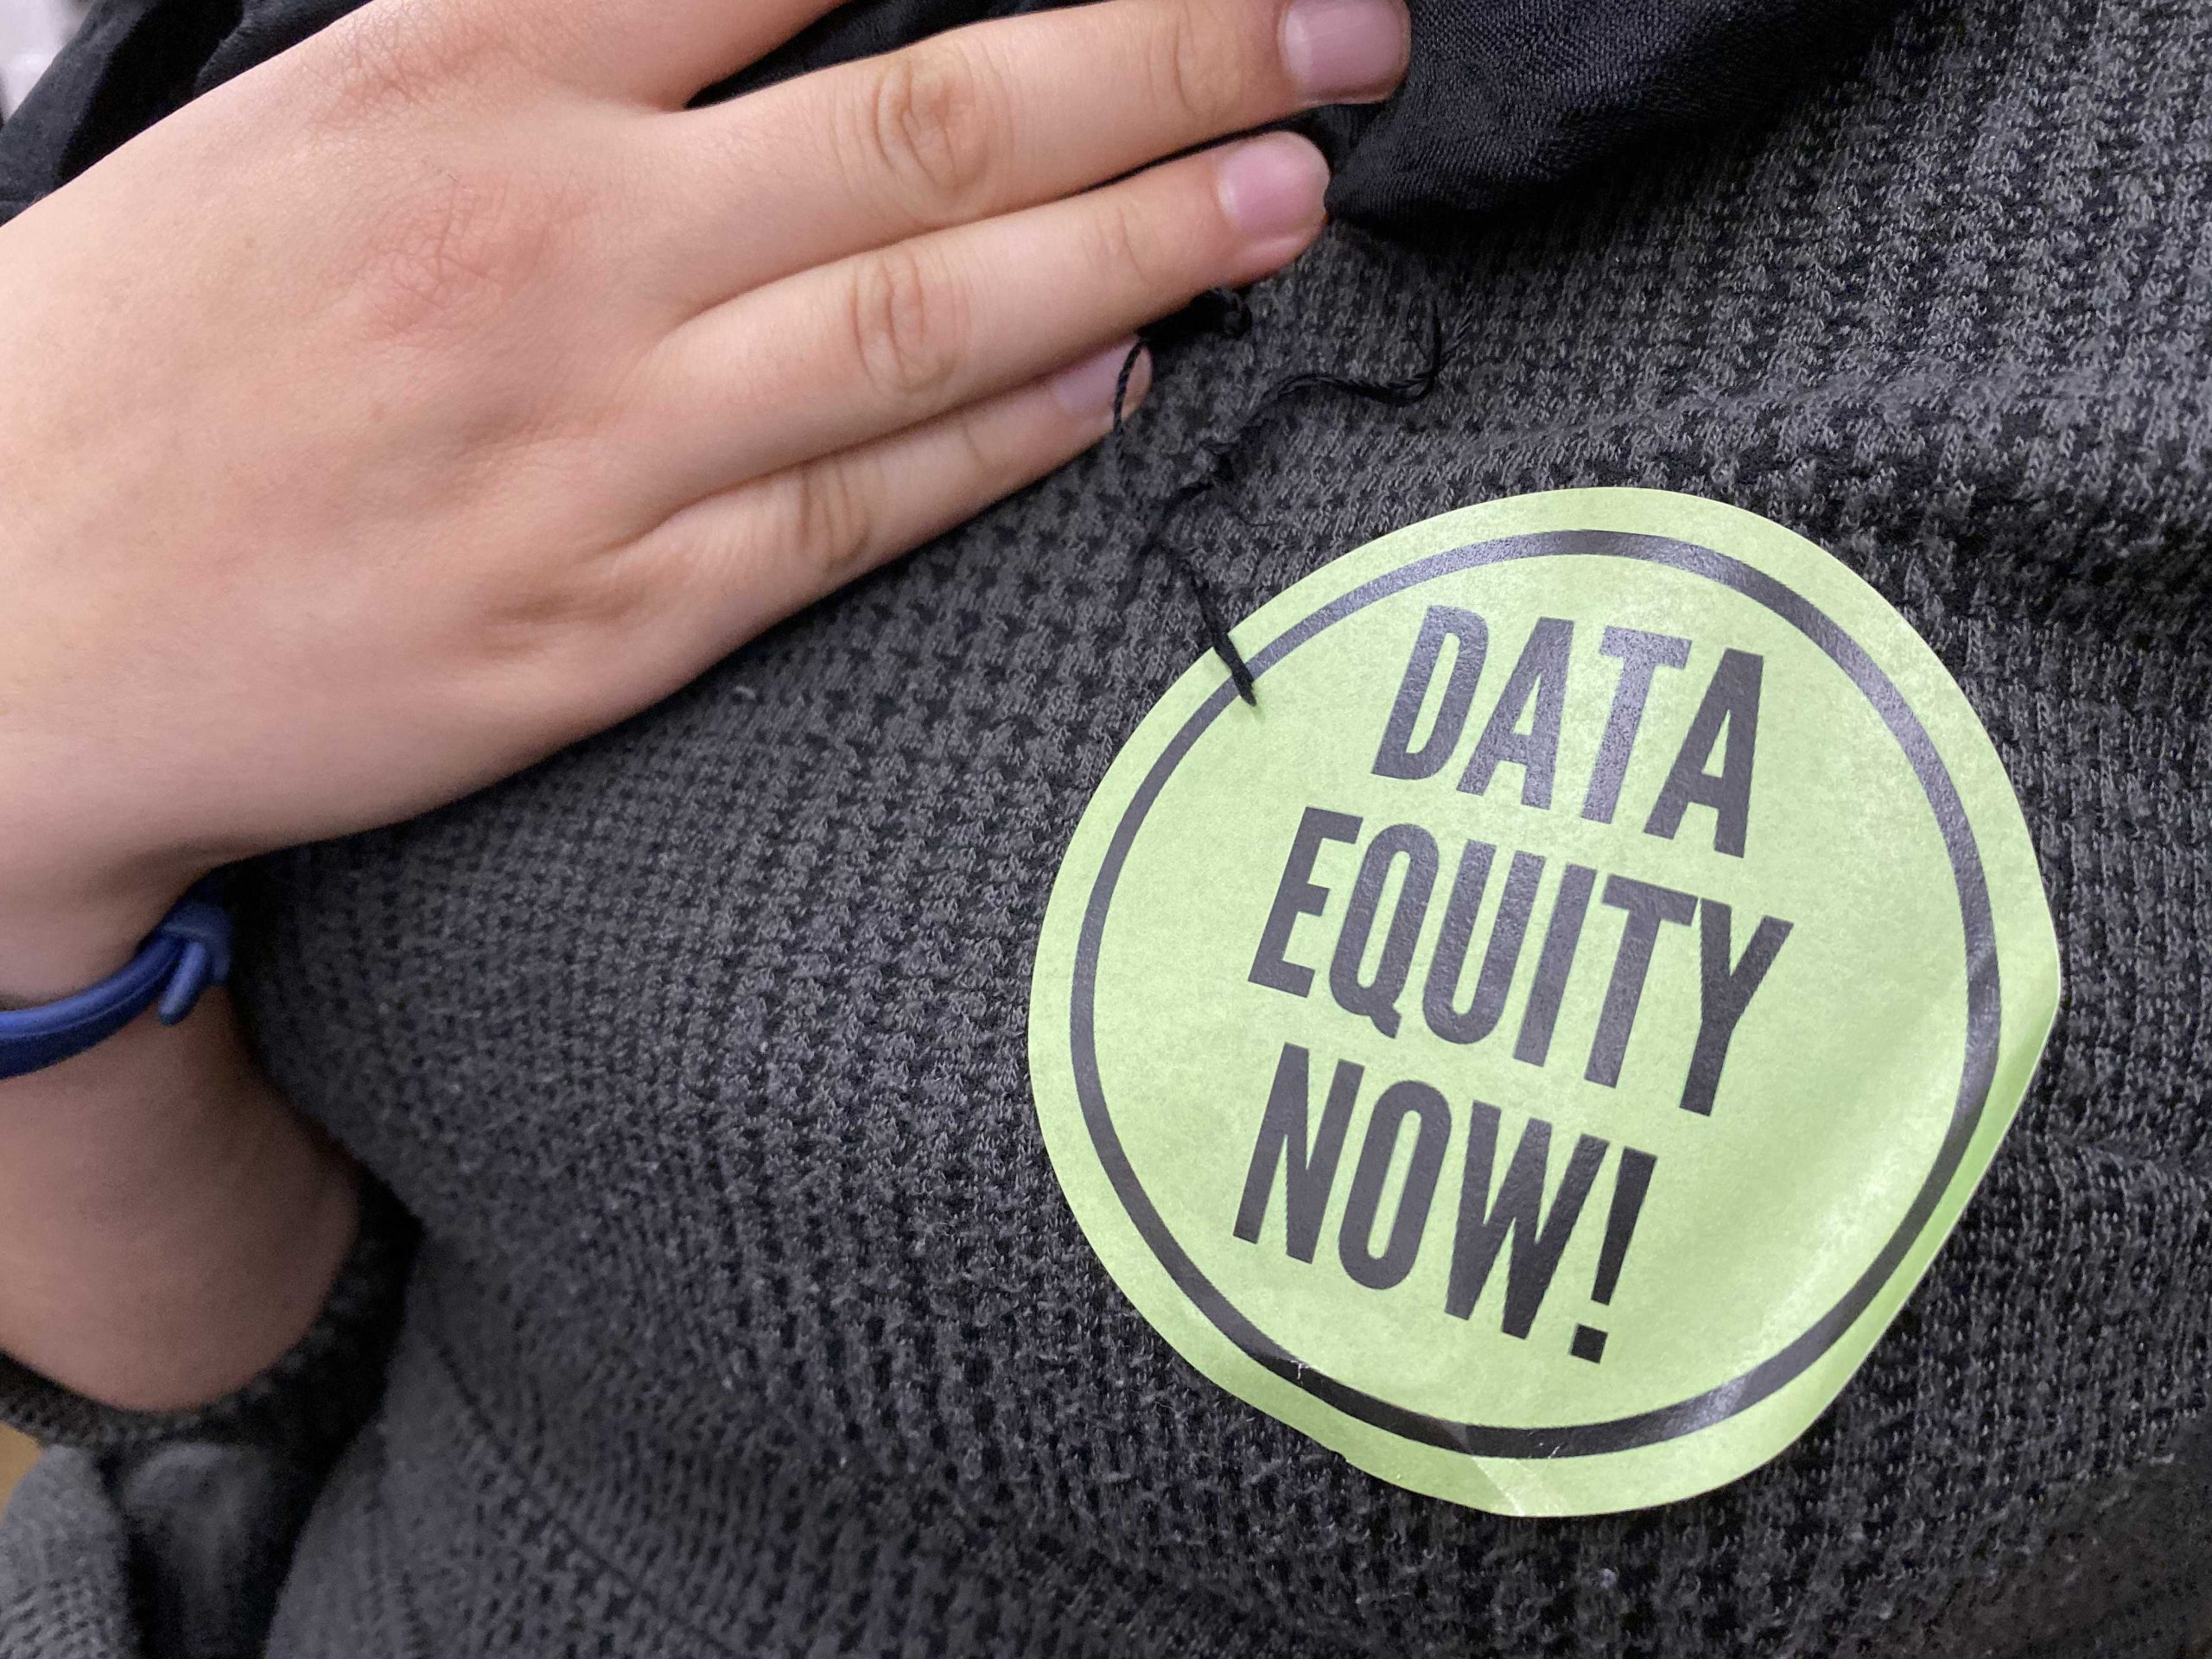 Advocates sporting light green stickers that read “Data Equity Now!” said the bill would give representation to groups within the commonwealth. Photo by Alexa Gagosz.